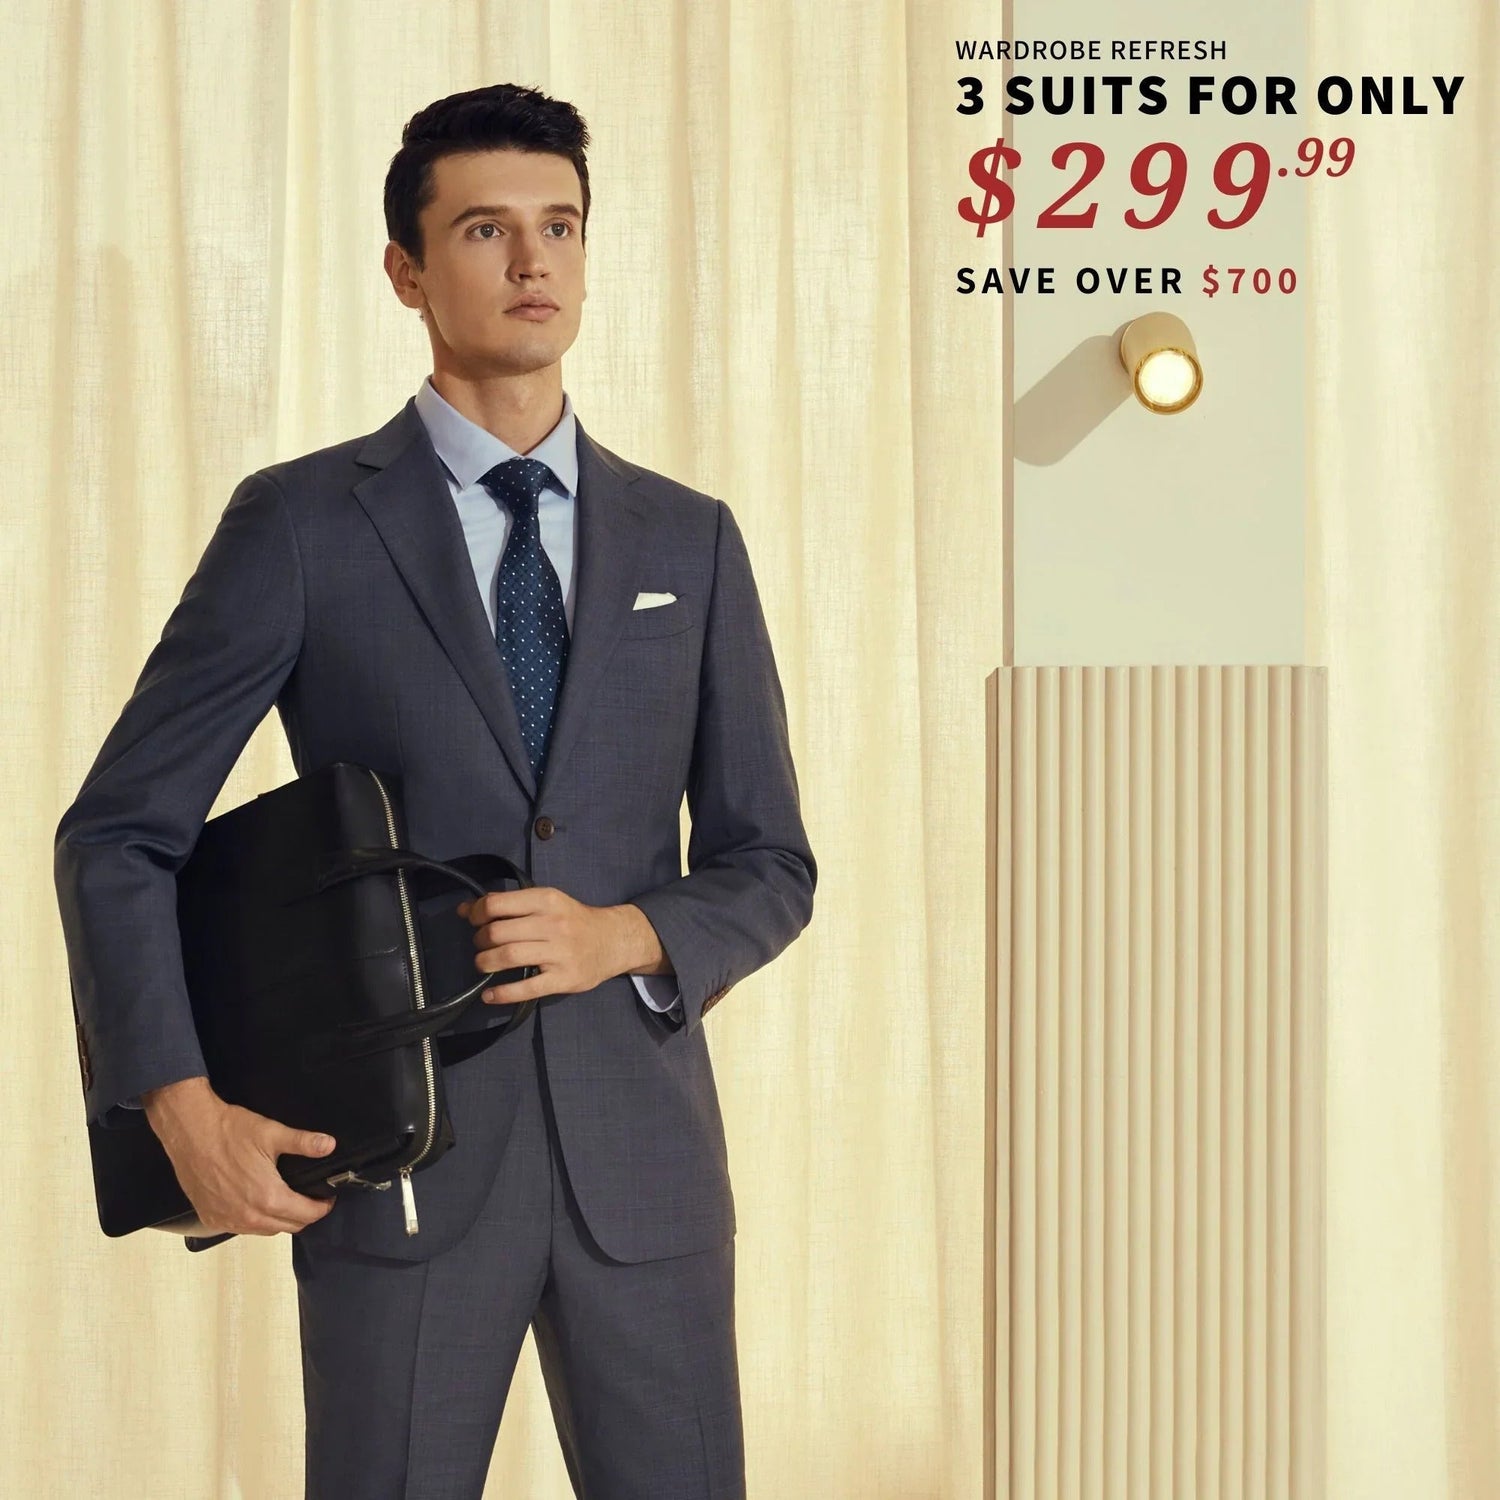 A man in a suit is holding a briefcase, flaunting his BYOB 3 Suits for $299.